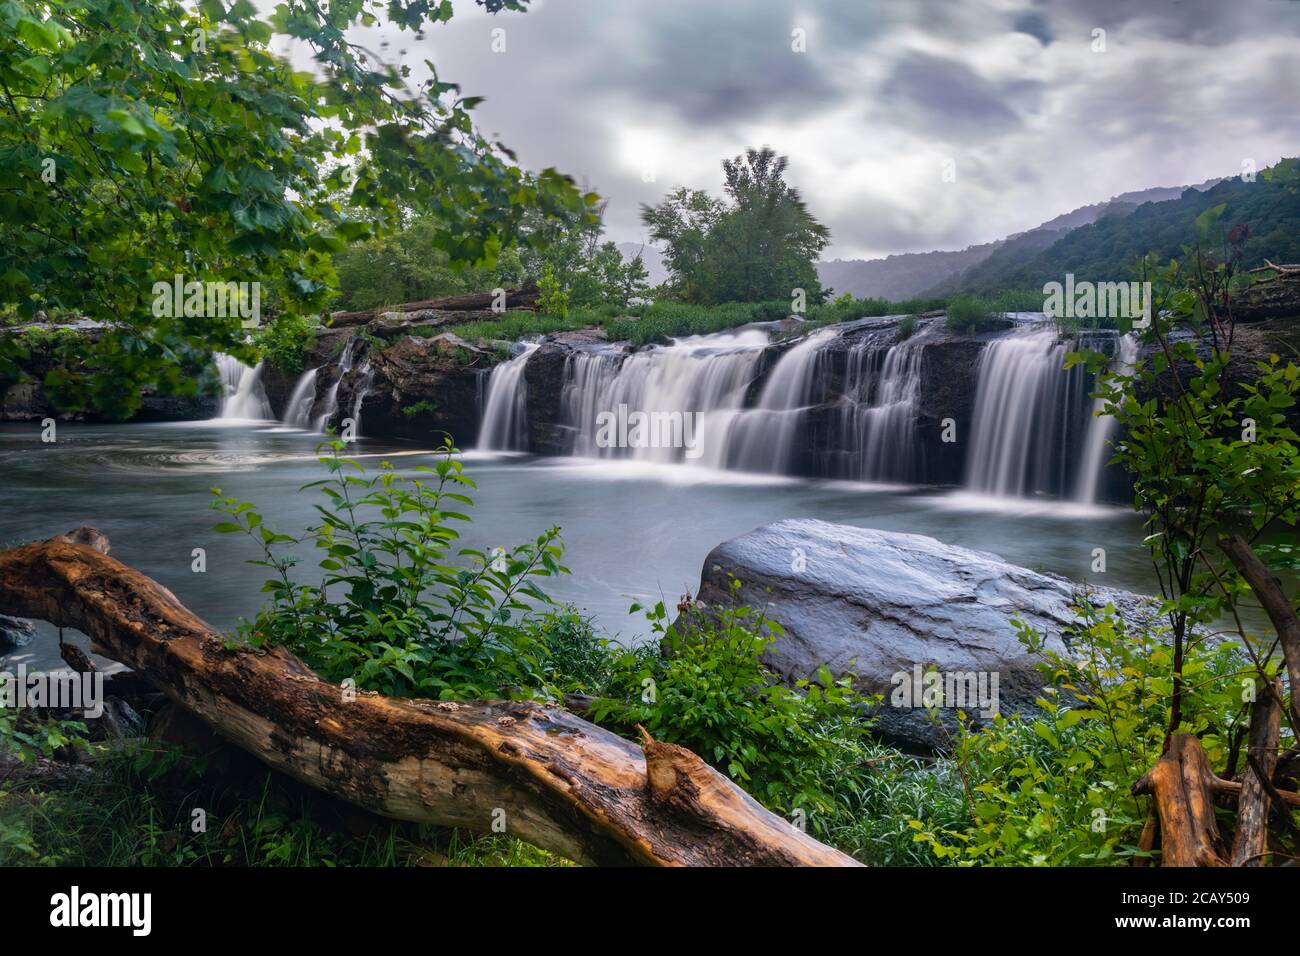 Flowing water Sandstone Falls on the New River, West Virginia, USA Stock Photo